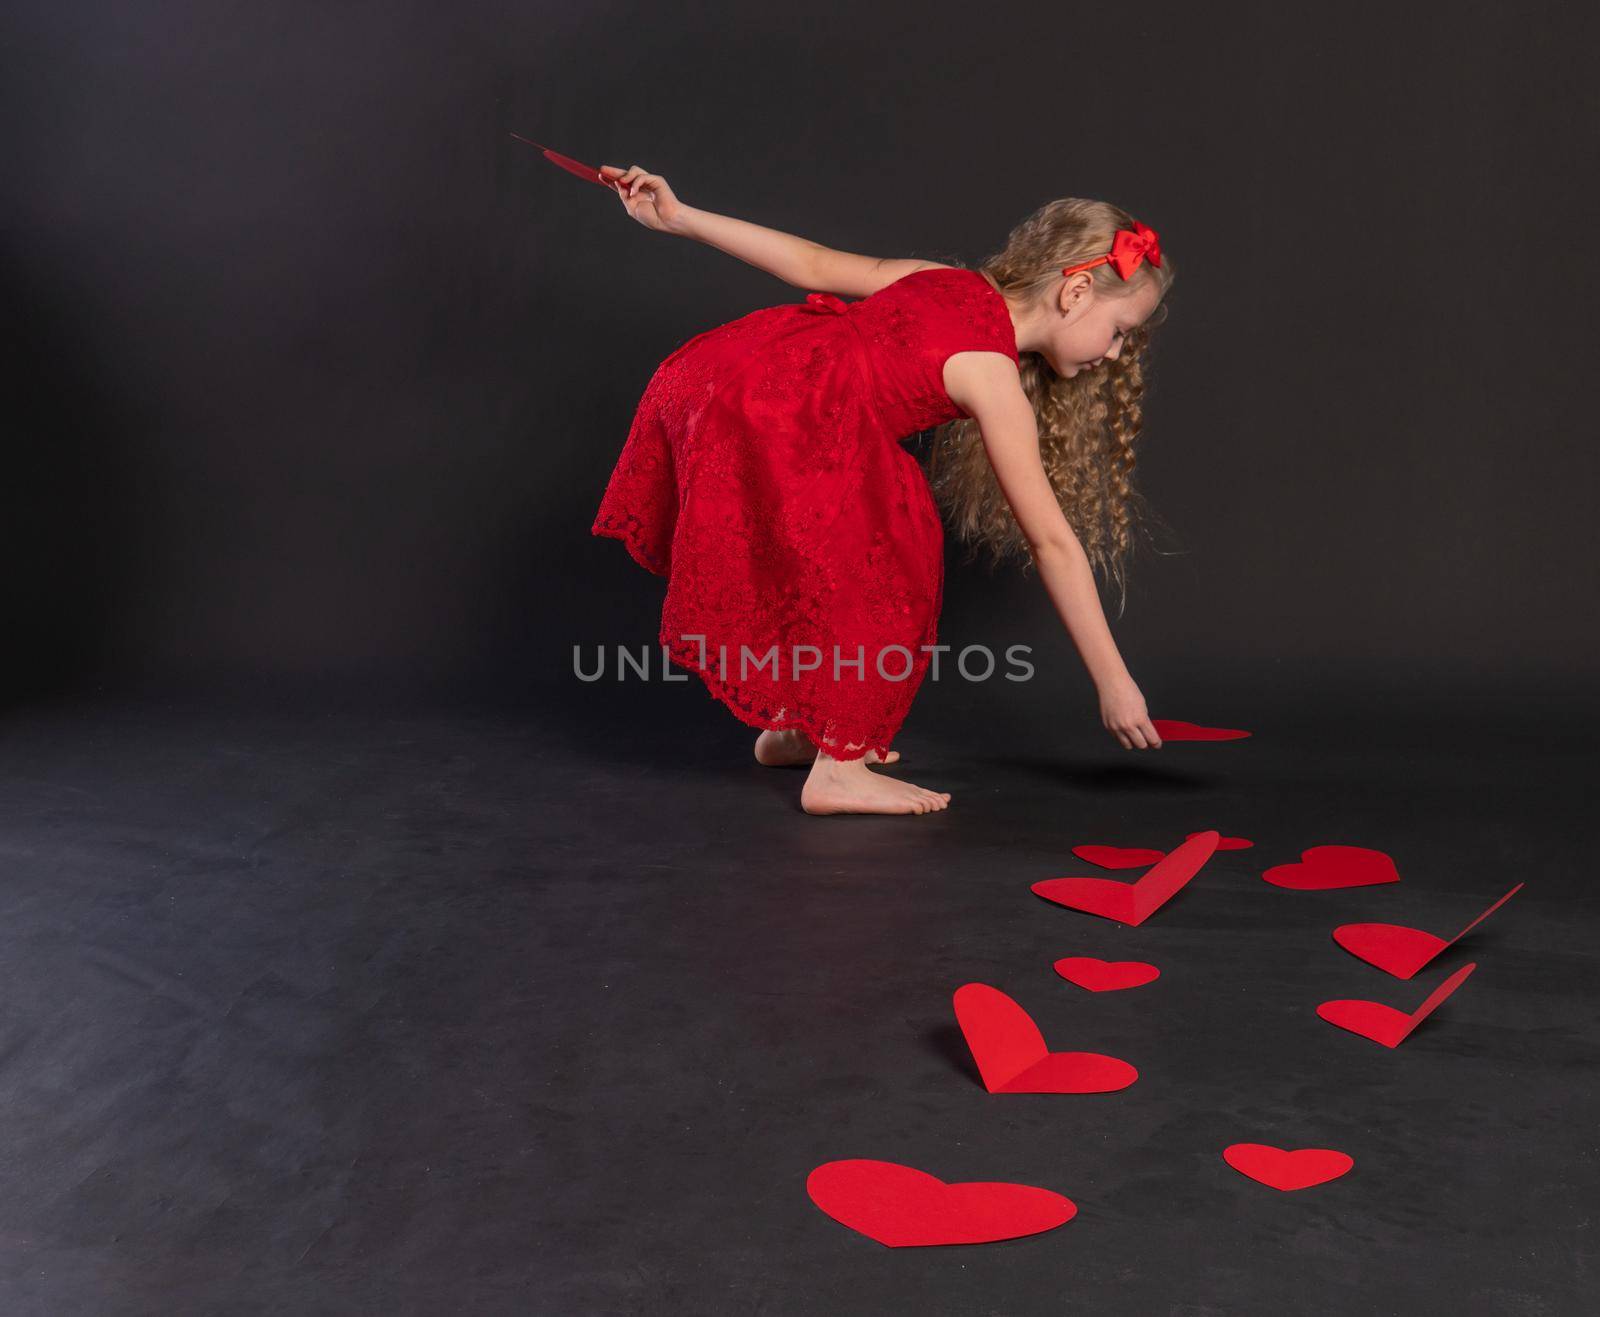 paper hearts Valentine, happiness, on the floor hearts romance romance. shape of the honeymoon. emotions, hearts in a red dress girl, barefoot by 89167702191